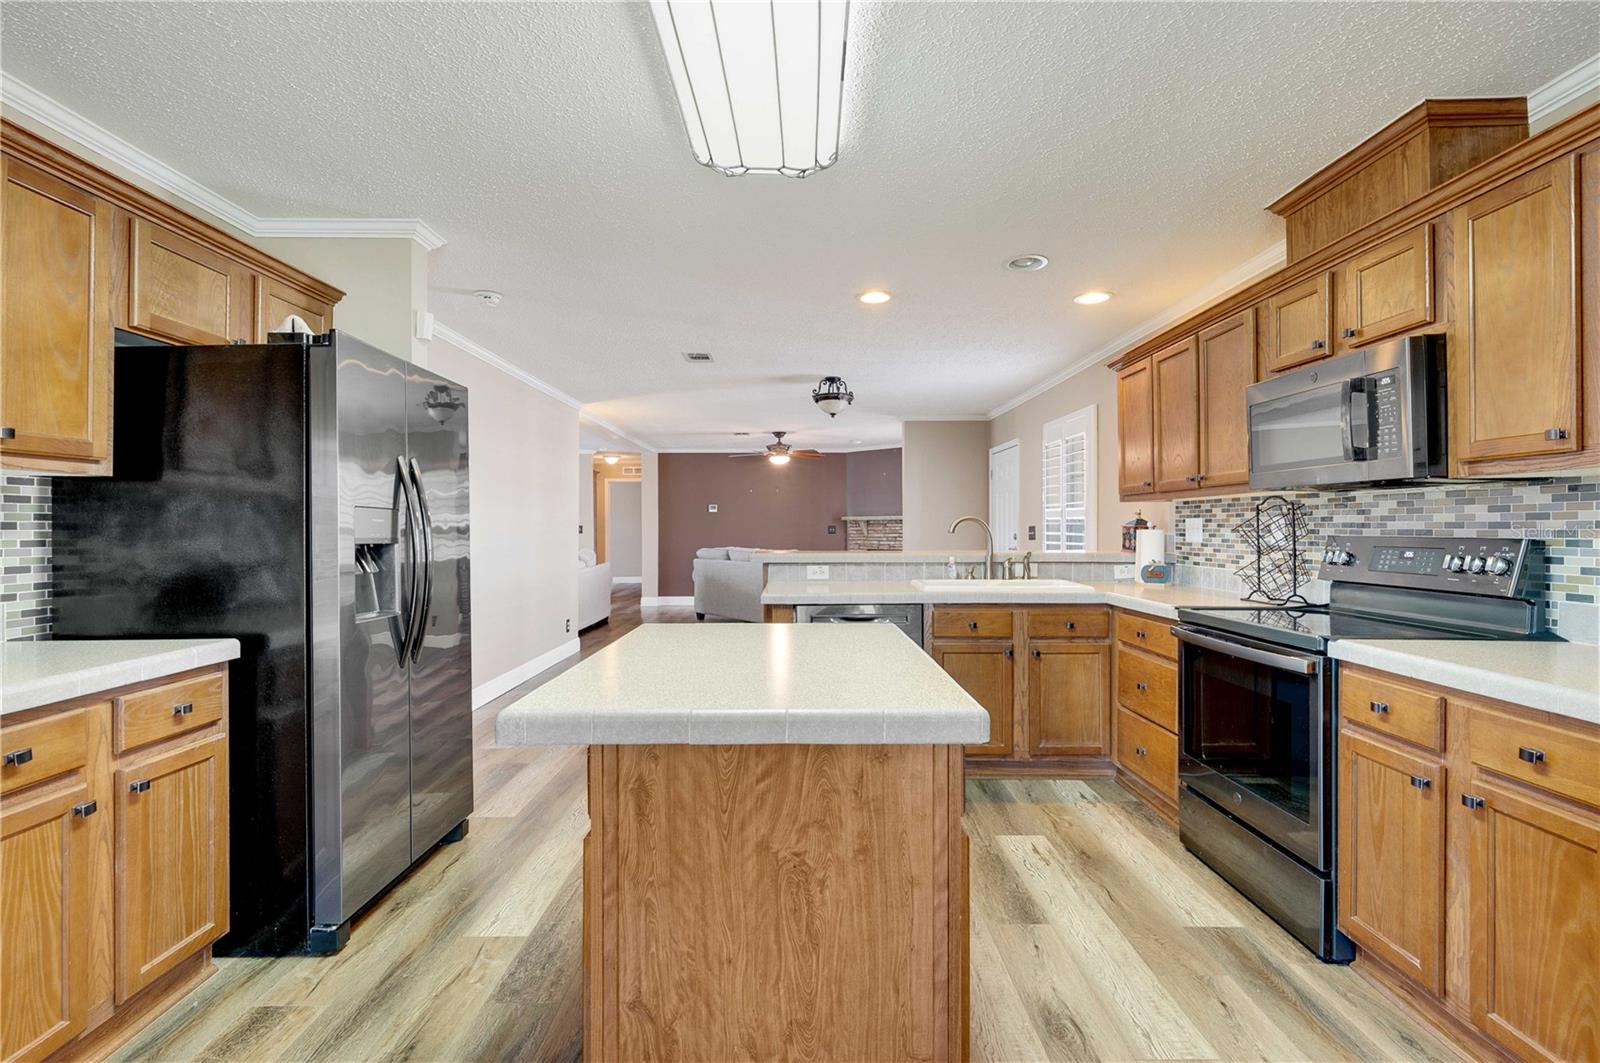 The kitchen has many upgrades including real wood cabinets, center island, tile back splash, closet pantry, and ample storage/space for any chef.